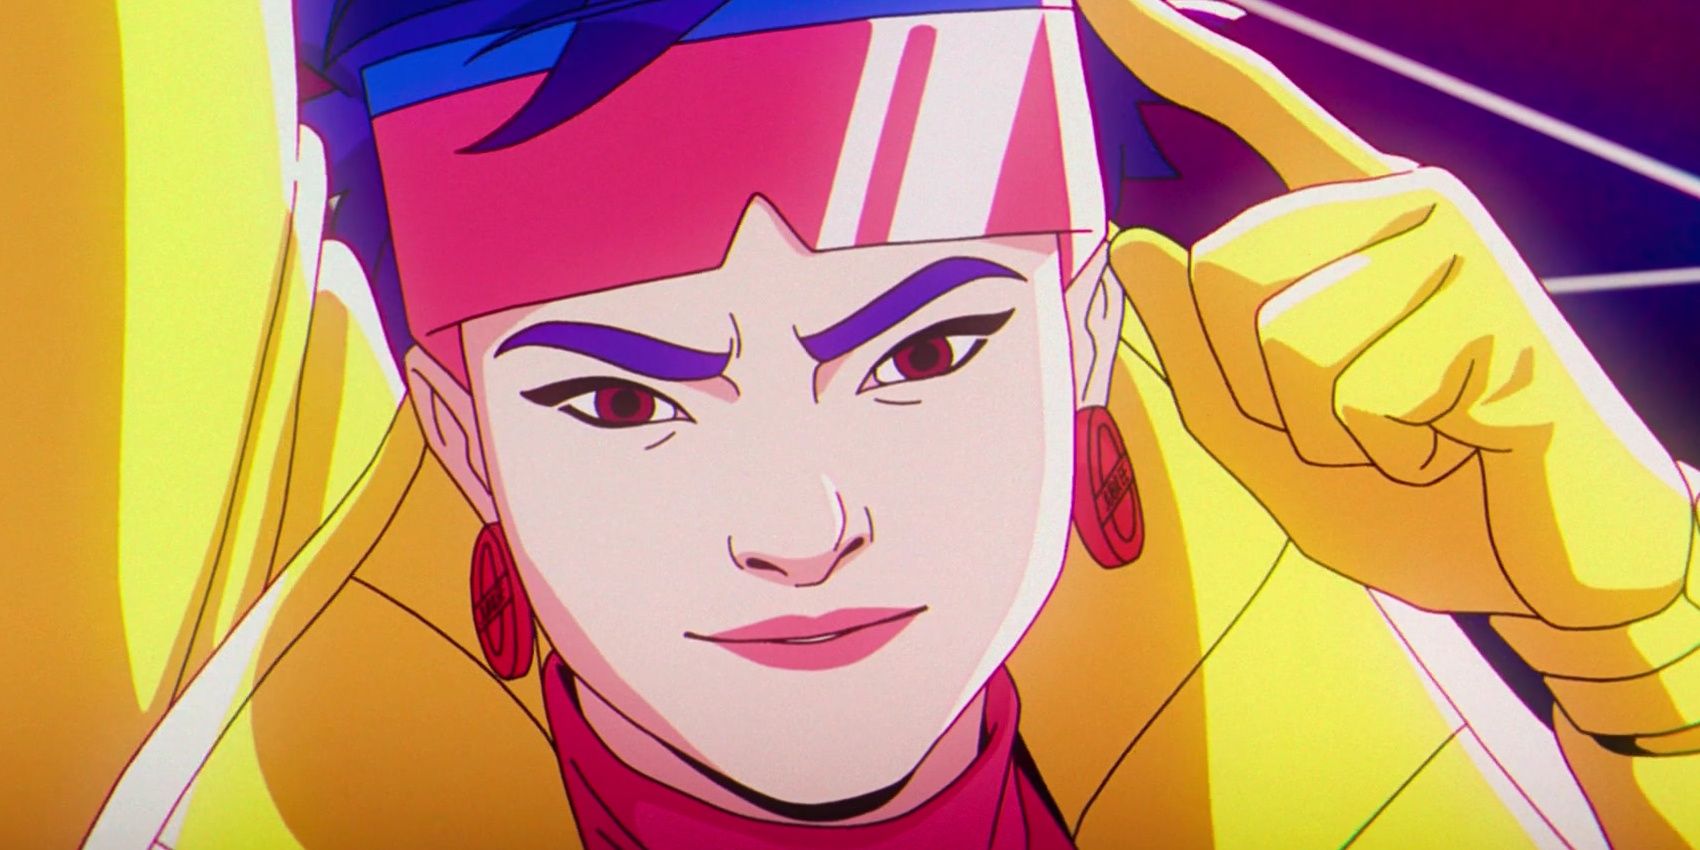 Jubilee draws her shades down in X-Men '97